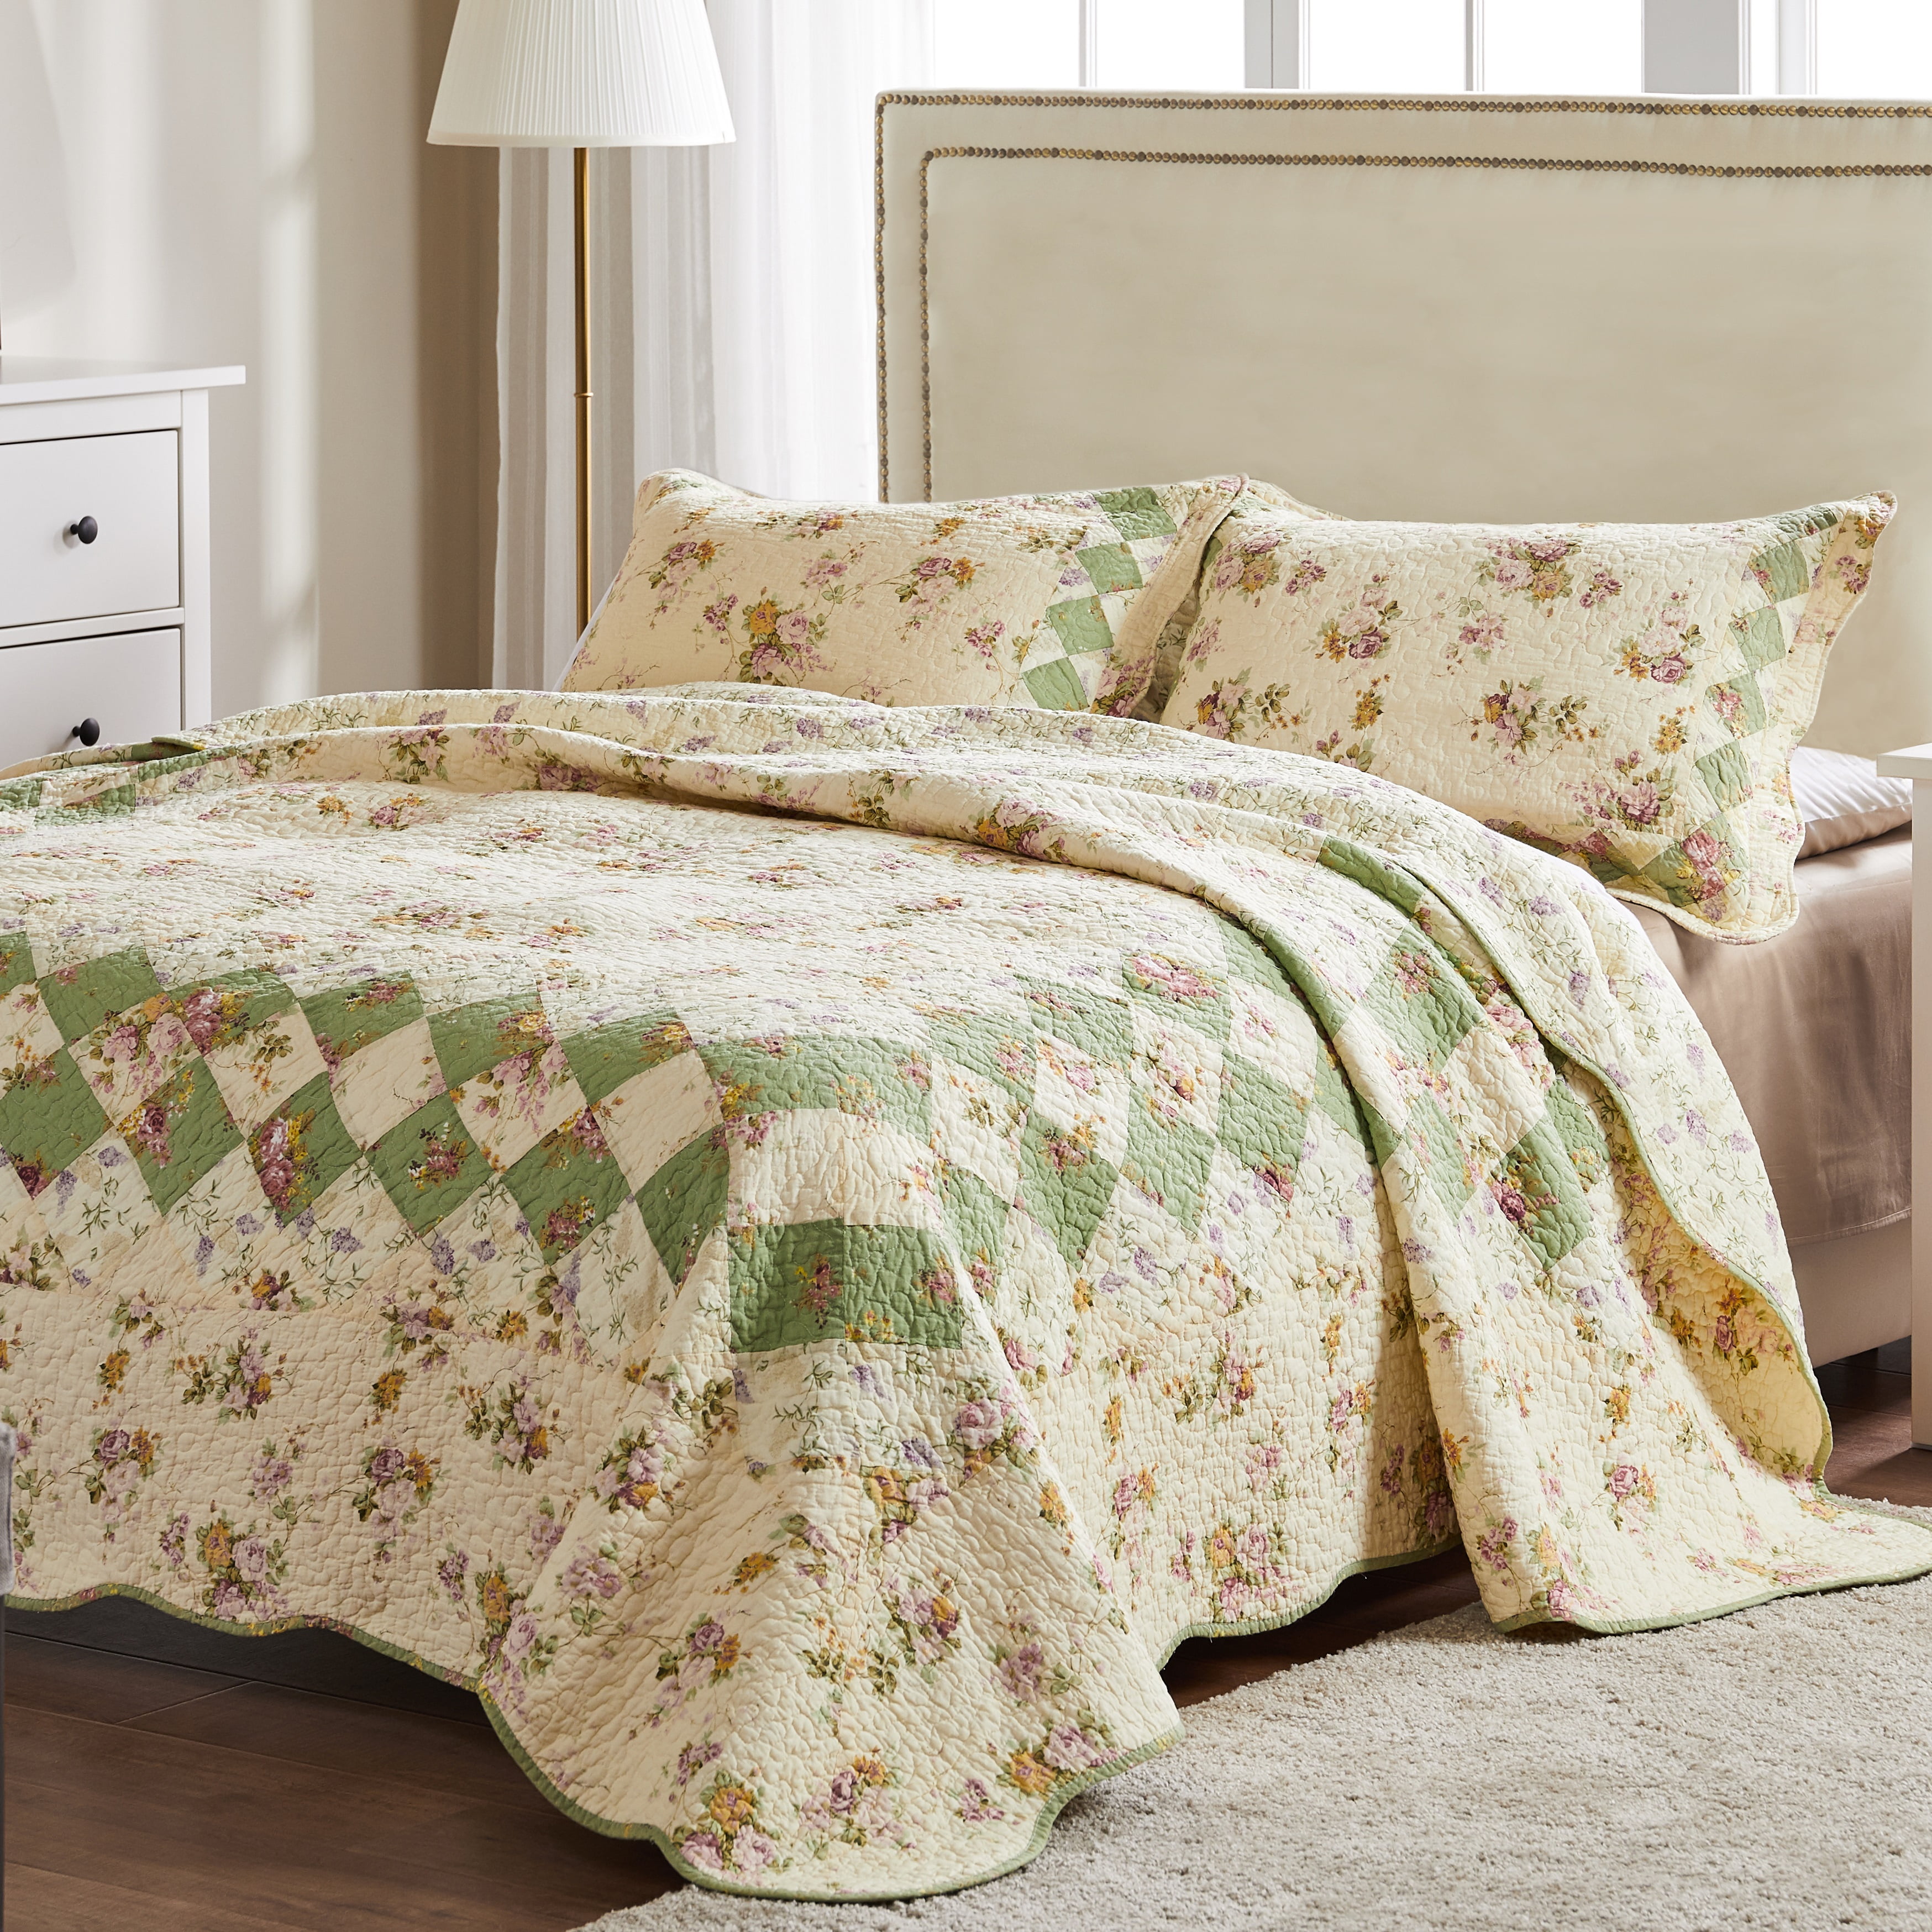 Details about   Greenland Home Blooming Prairie 100% Cotton Authentic Patchwork Quilt Set 3-Pie 